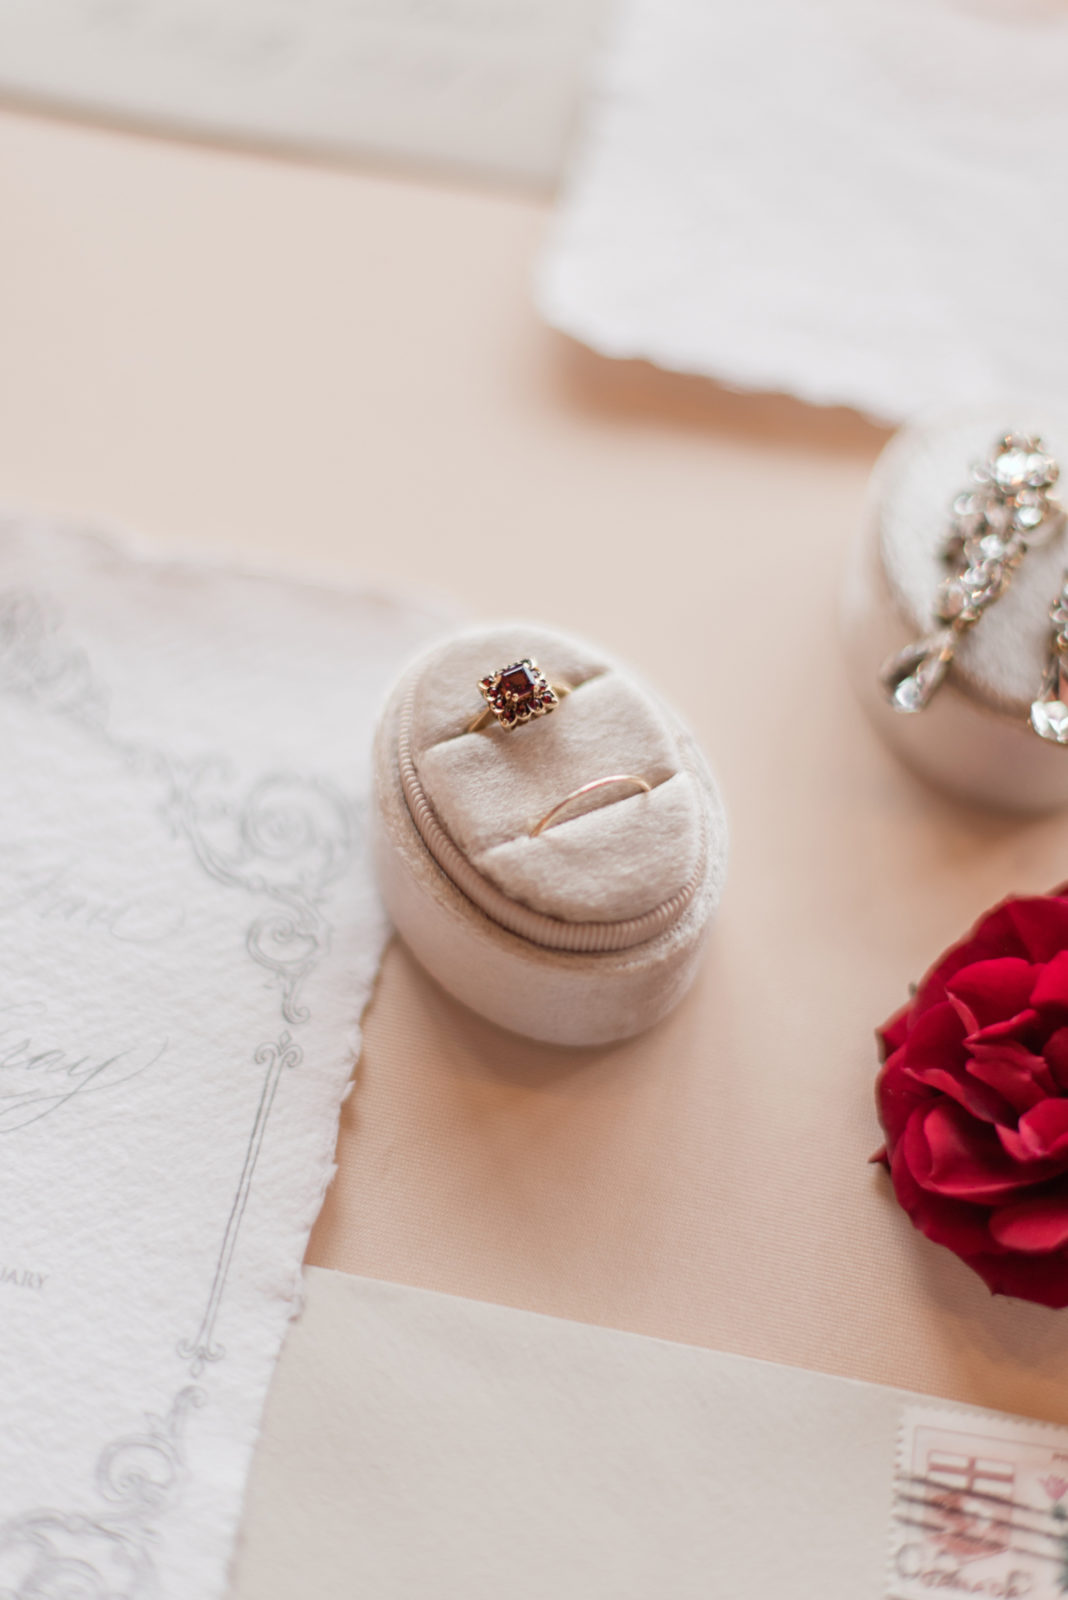 Romantically Regal Bridal Inspiration at the Royale YYC - wedding inspiration featured on Brontë Bride, engagement ring